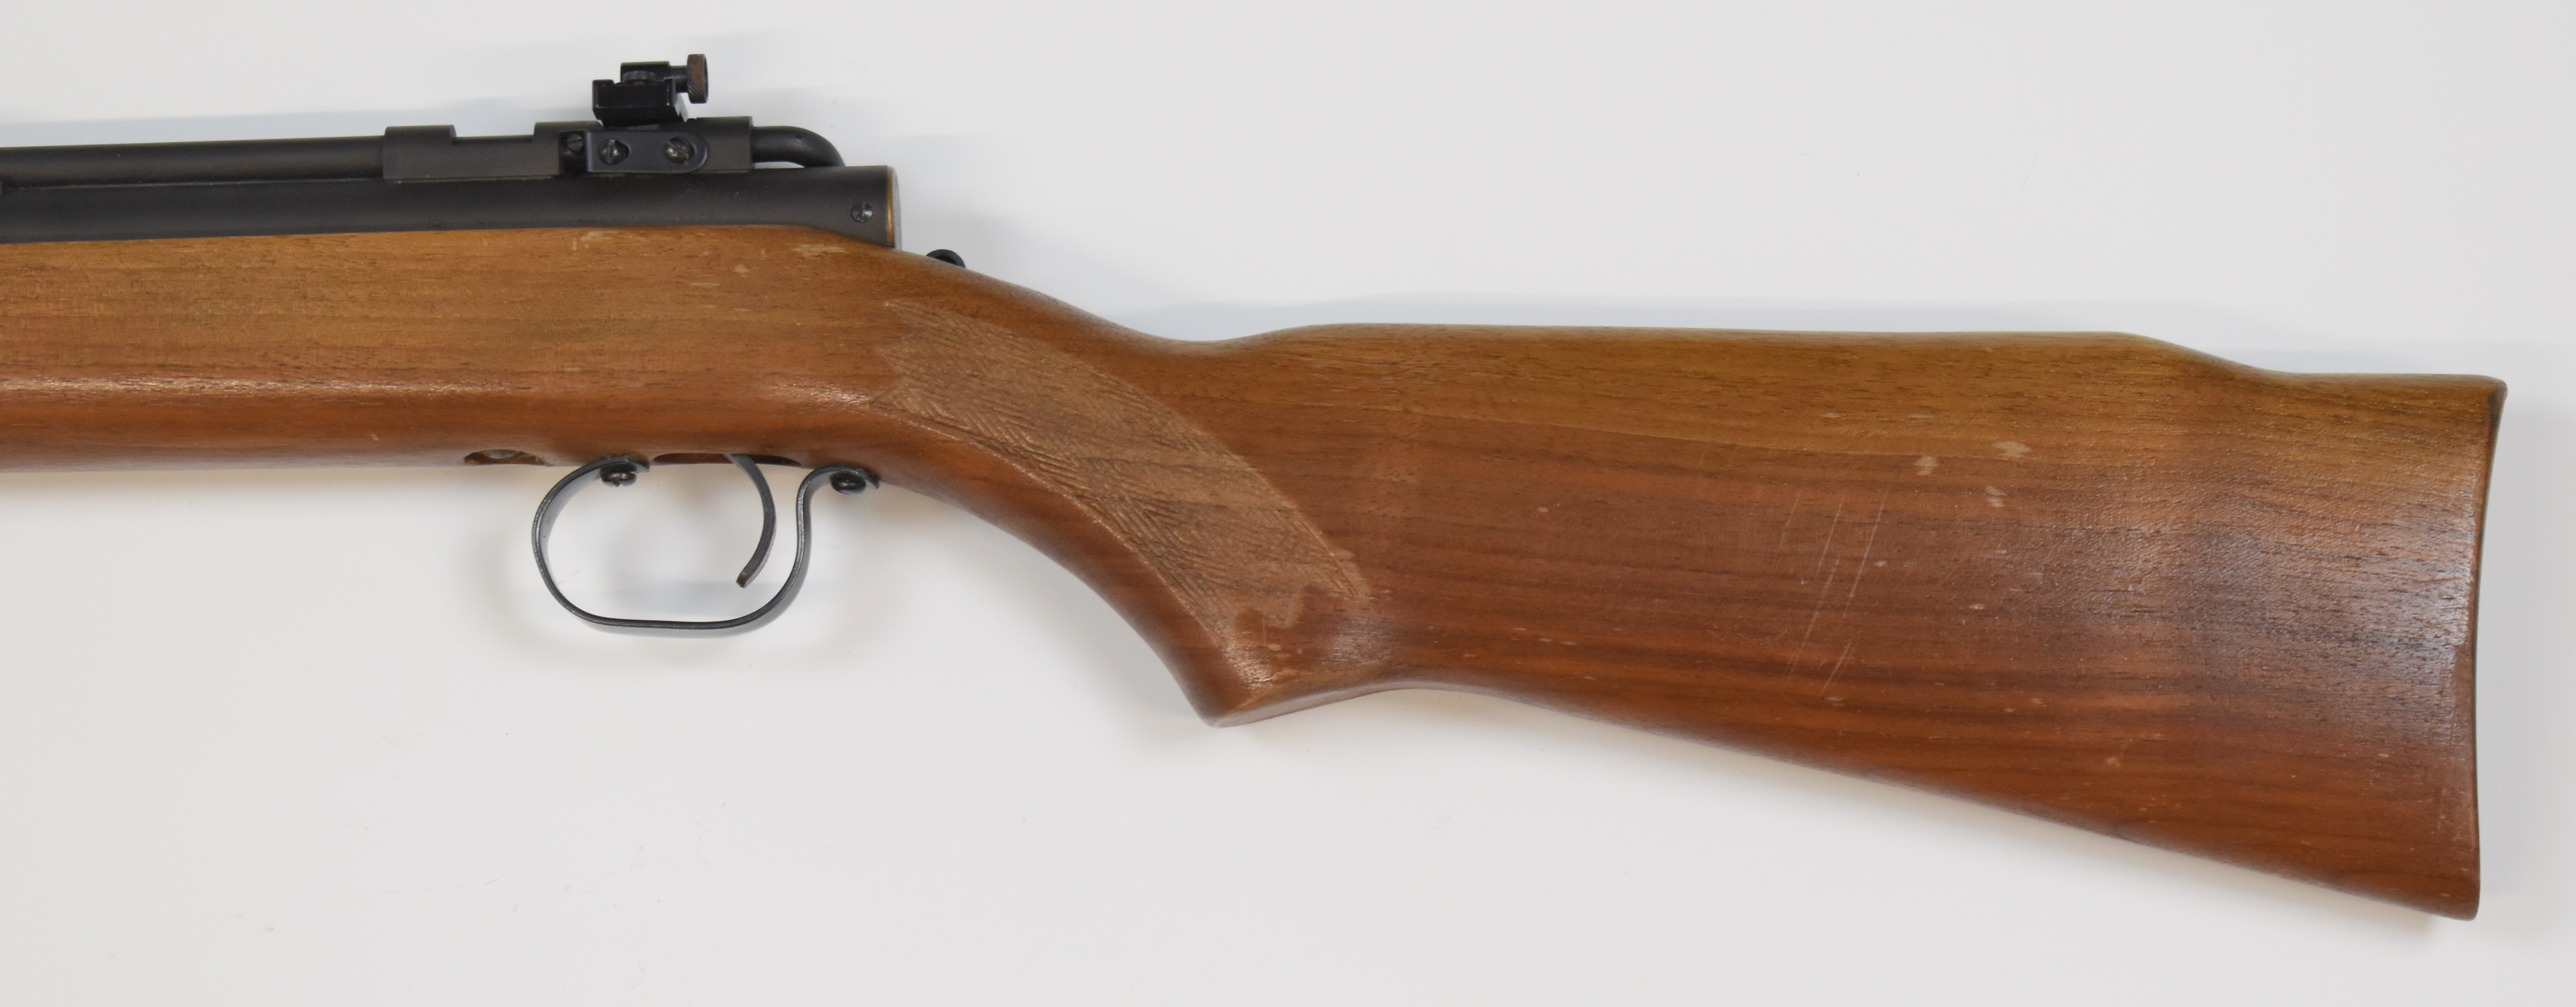 Benjamin Franklin Model 342 .22 under-lever bolt-action air rifle with adjustable sights and - Image 8 of 10